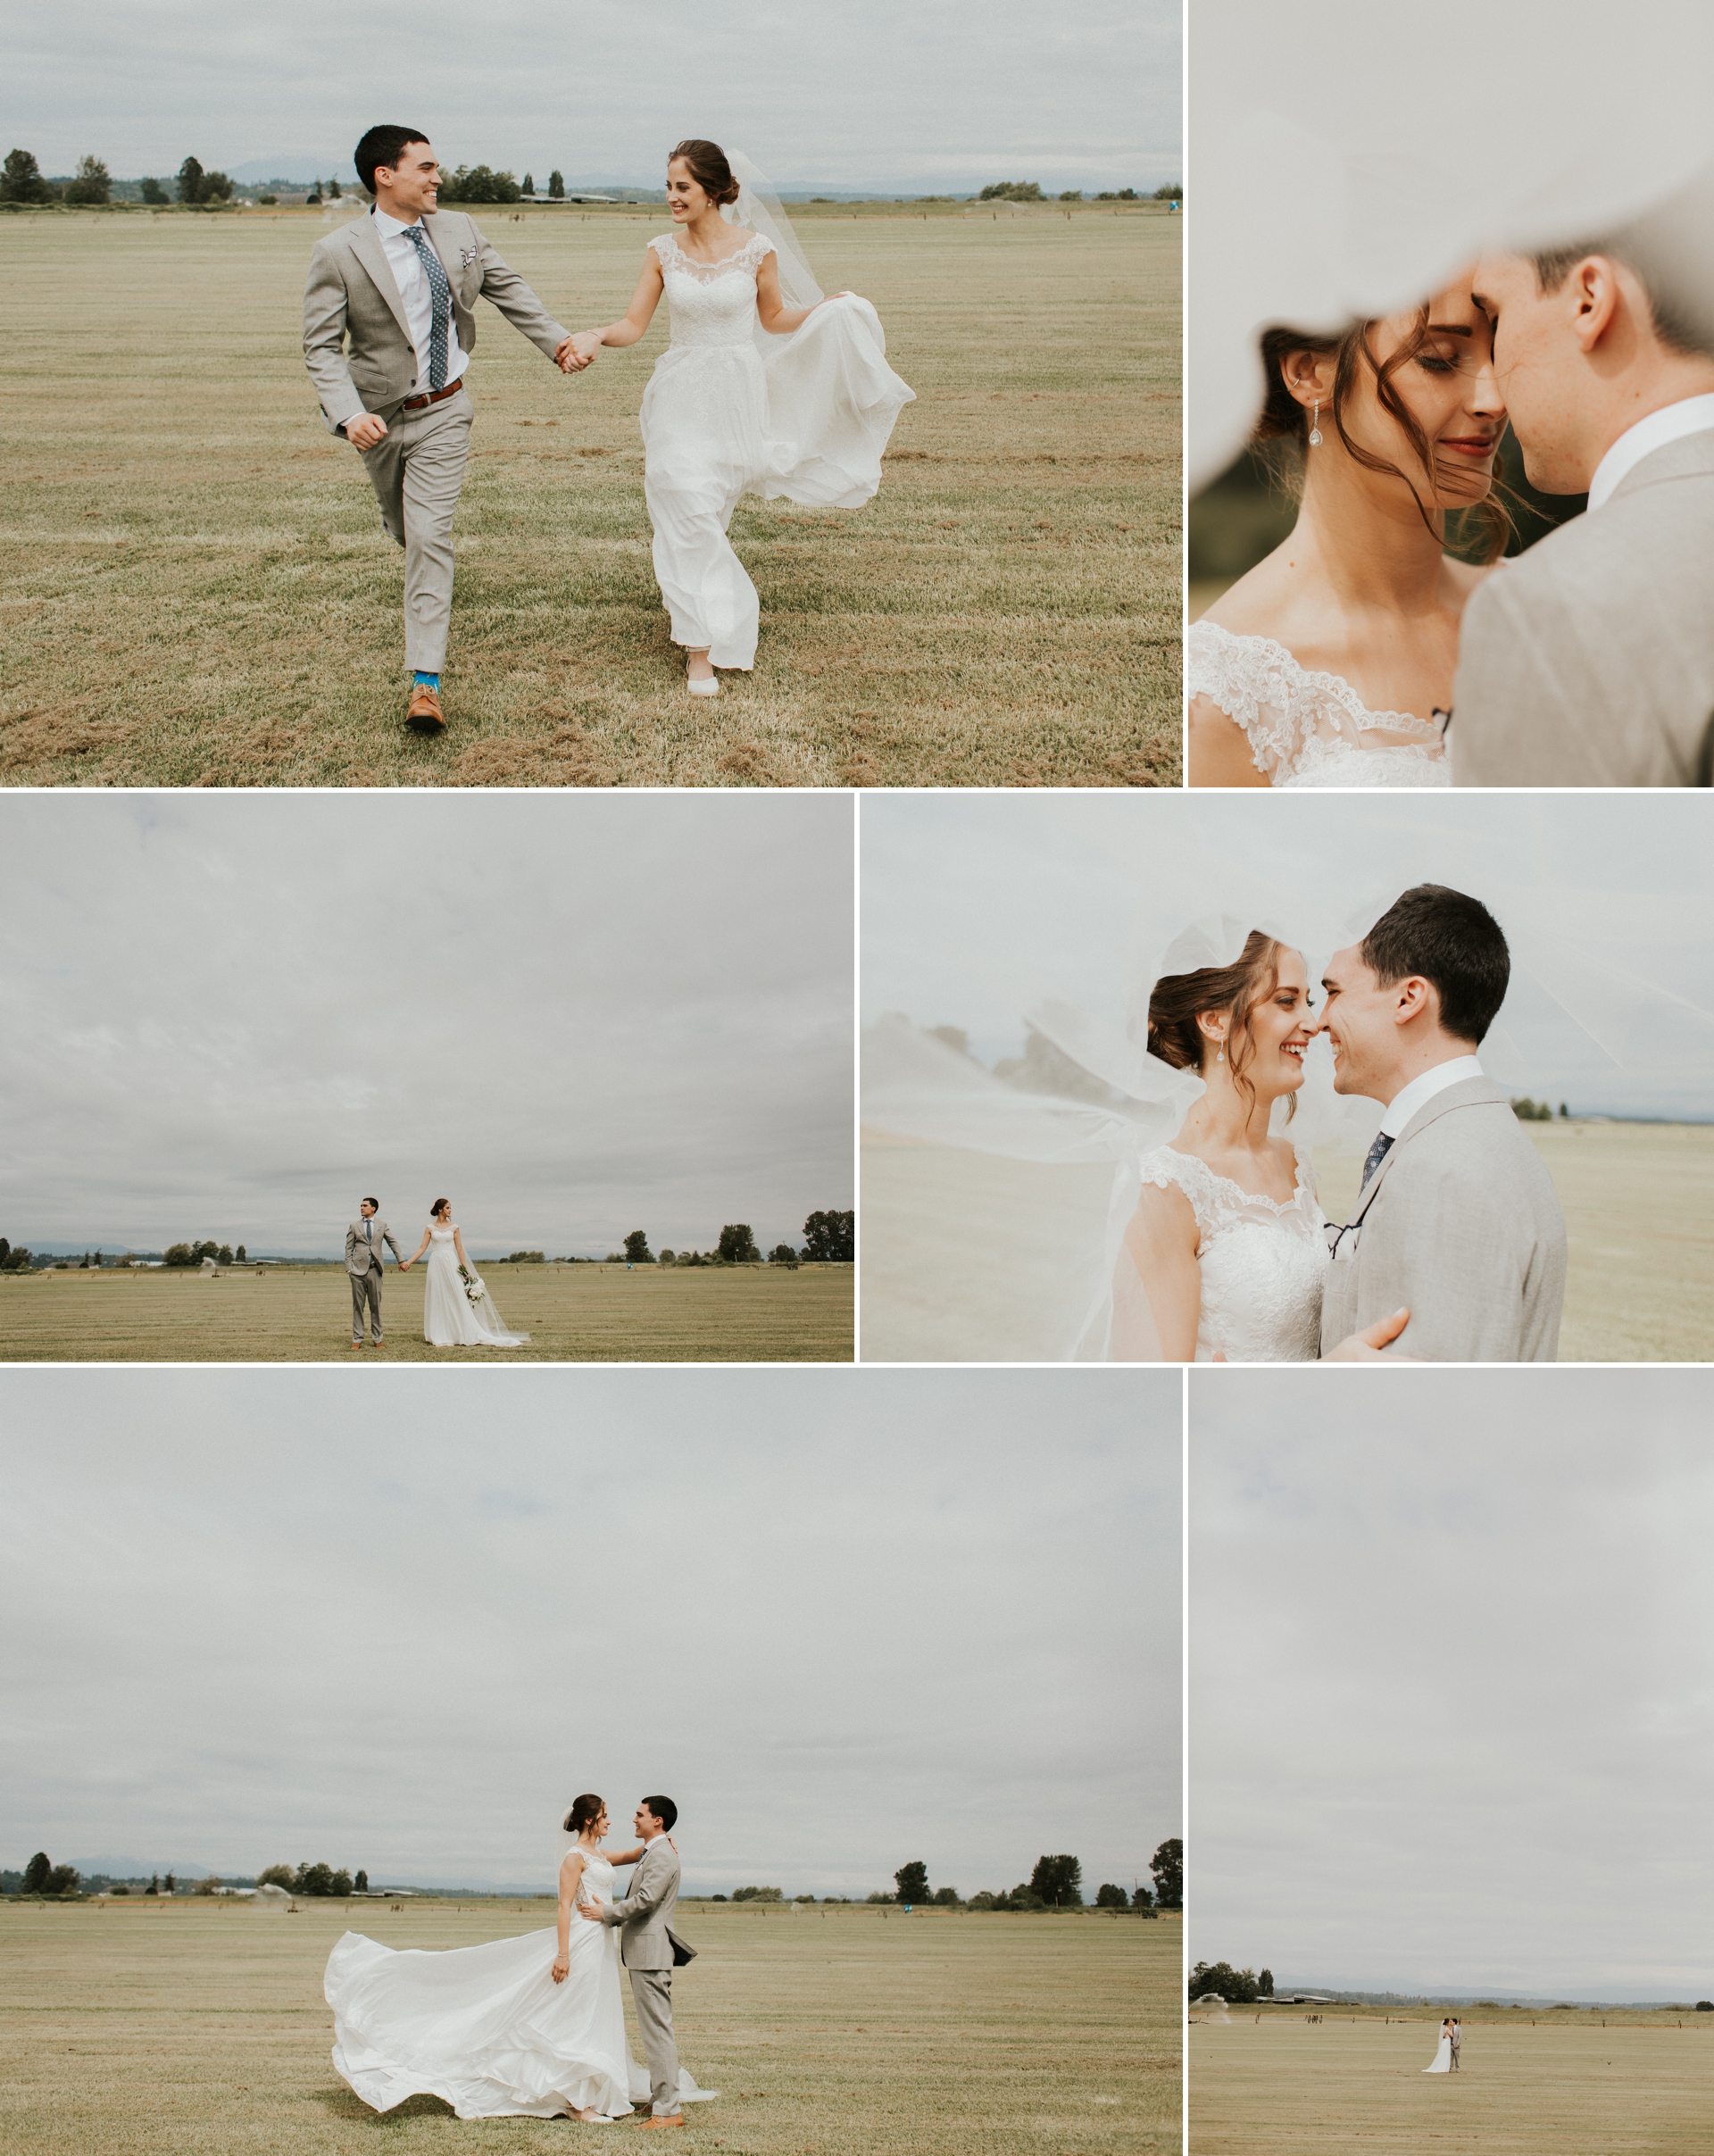 Spring Wedding at Hidden Meadows in Snohomish WA by Sarah Anne Photo